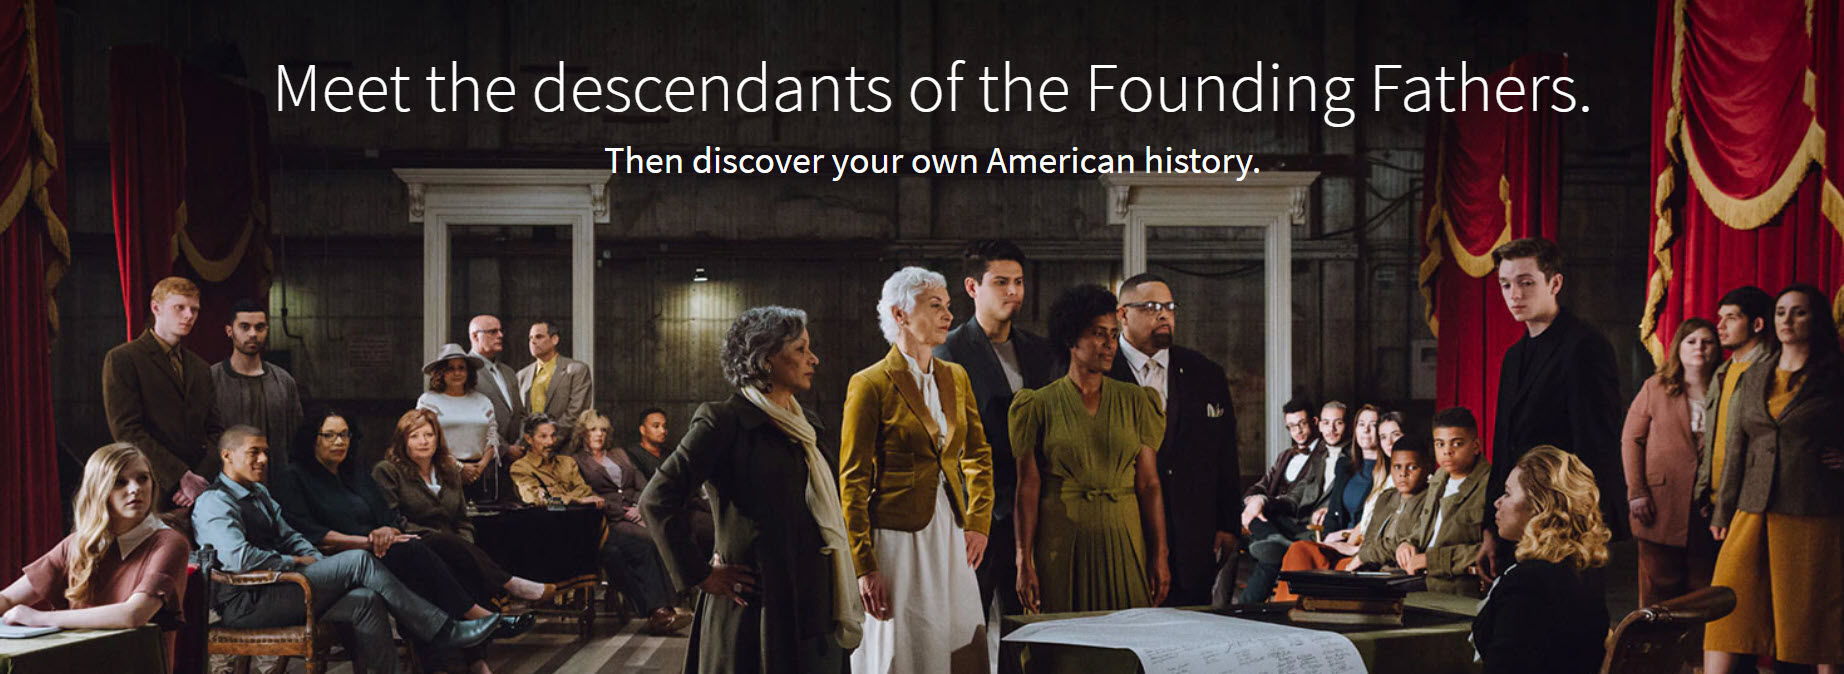 But genealogists and family historians know that Independence Day is the perfect time to not just research any "Founding Father" ancestors but also discover how our ancestors celebrated July 4th. To learn more about Independence Day click the image below to read a recent post - Meet the descendants of the Founding Fathers - at Ancestry